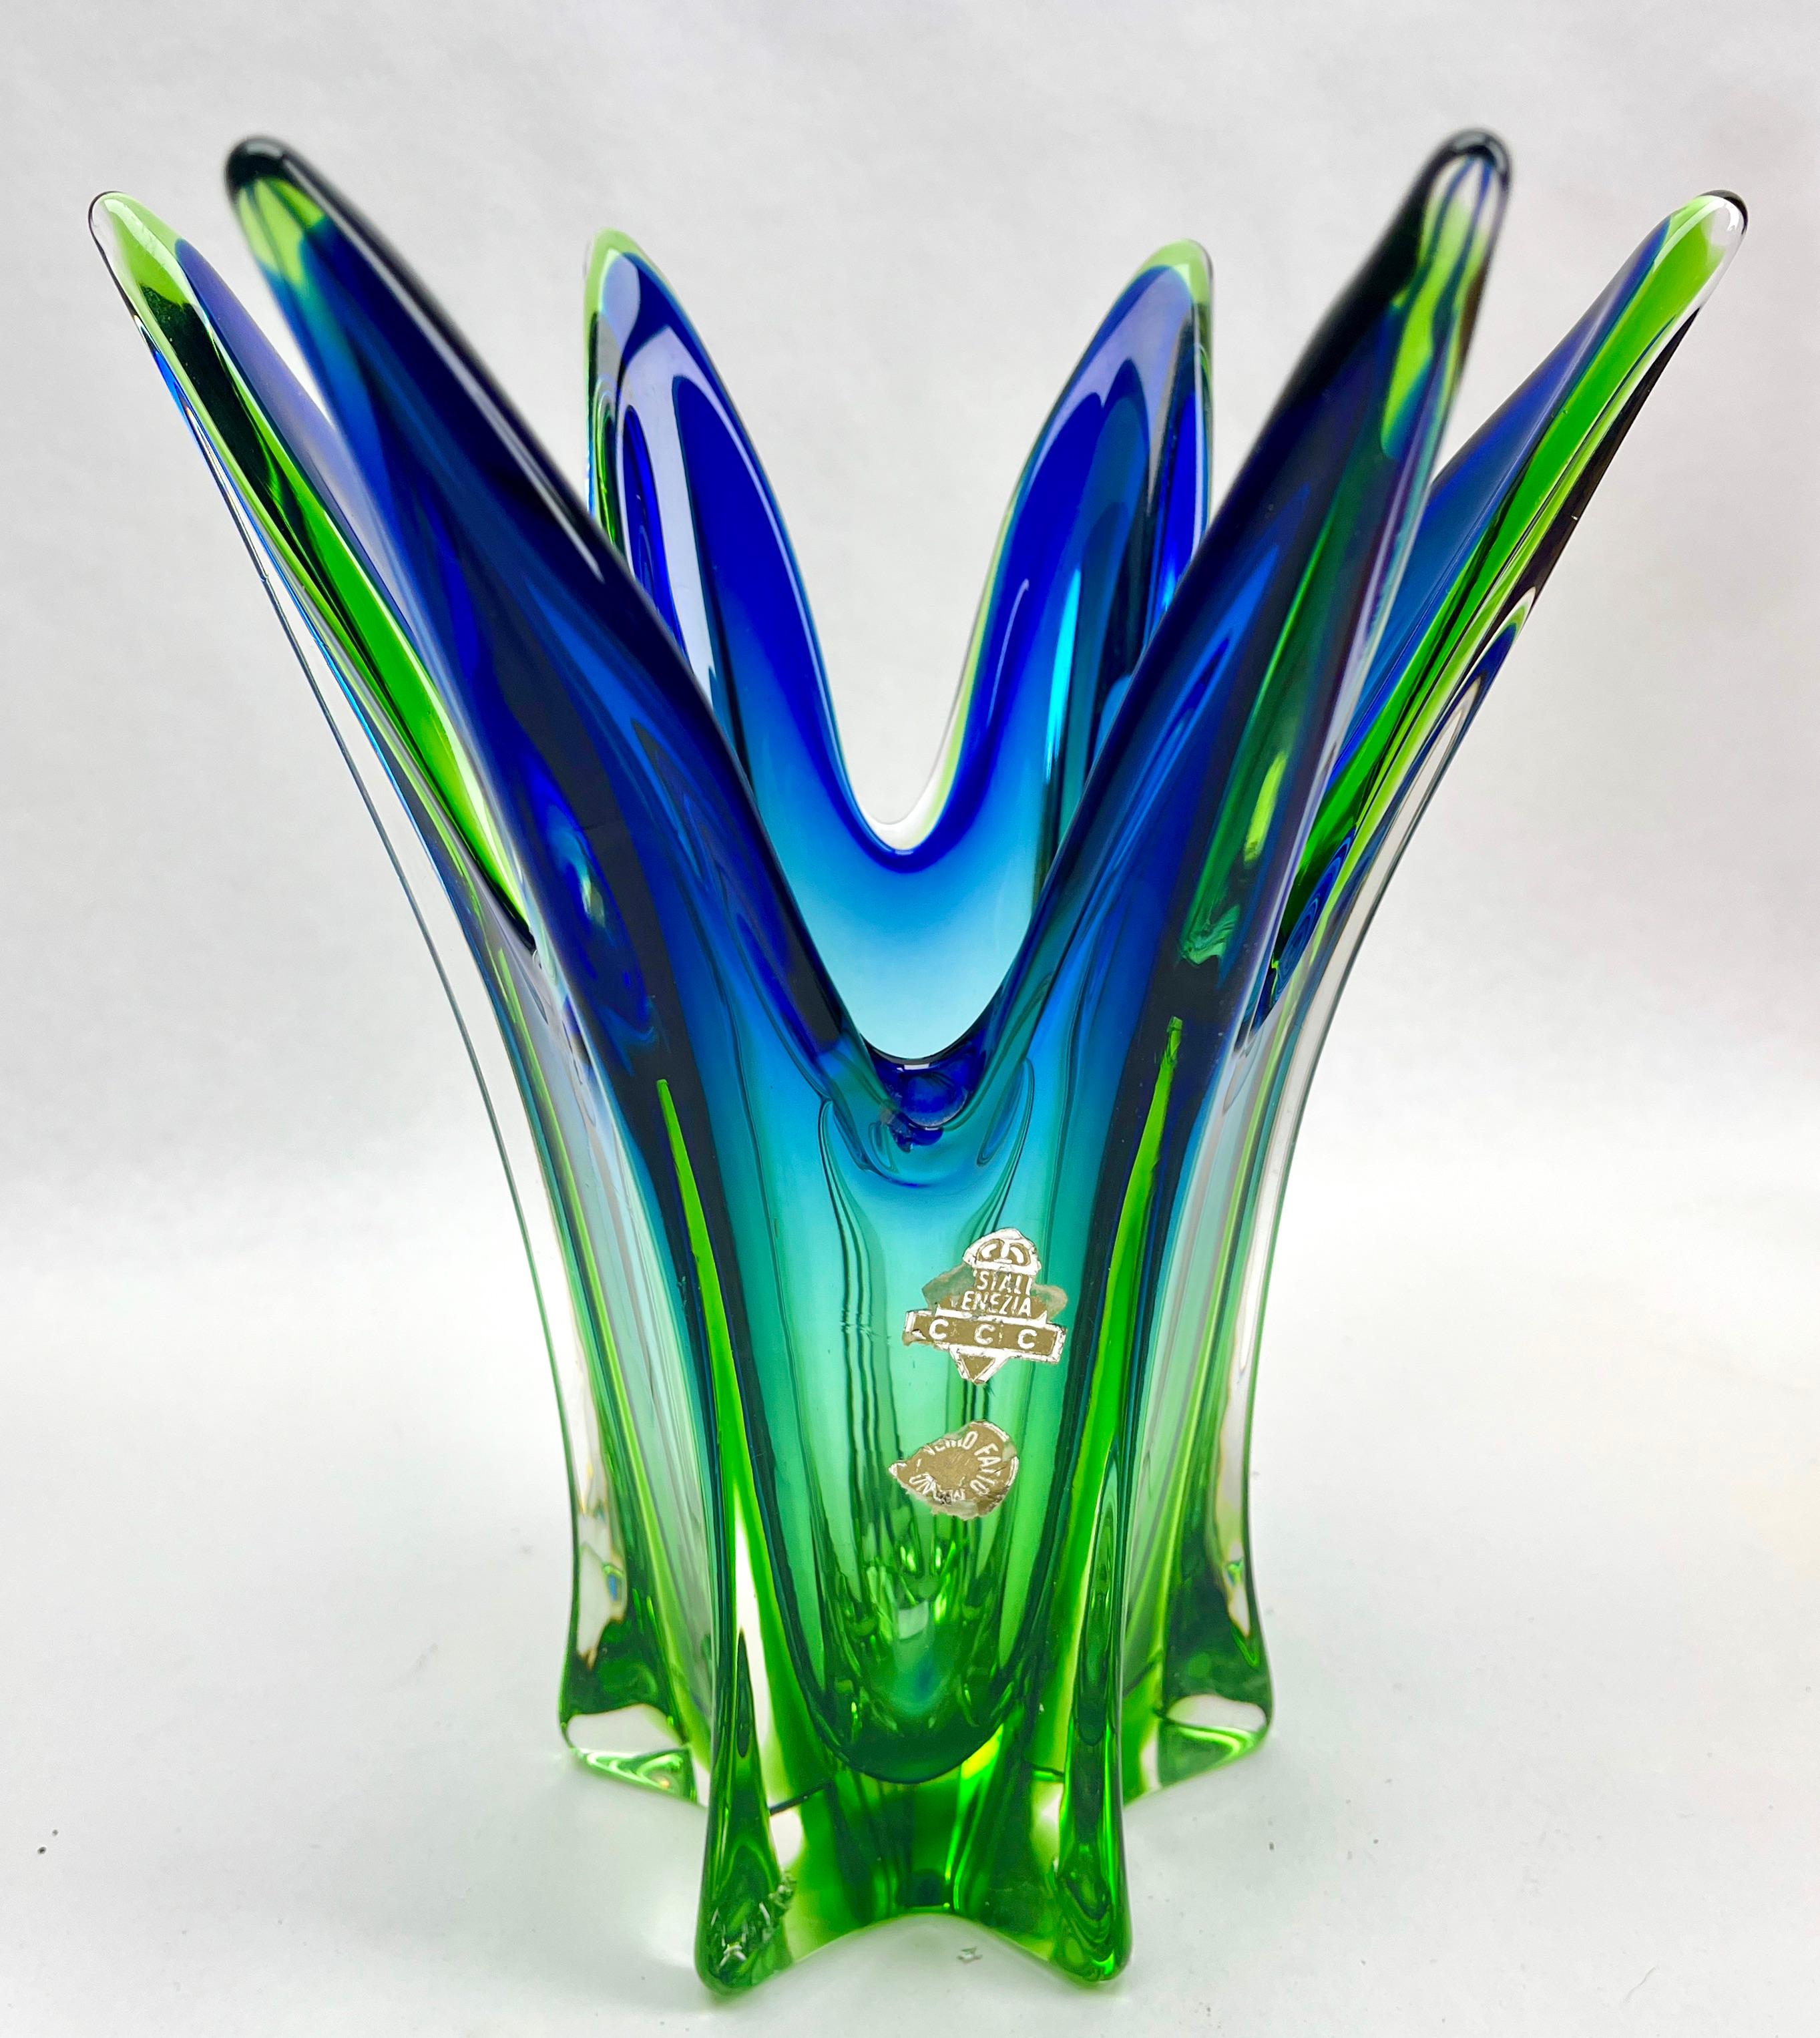 Hand-Crafted Solid Crystal Biomorphic Vase with Waves of Bright Green and Sommerso Bohemian